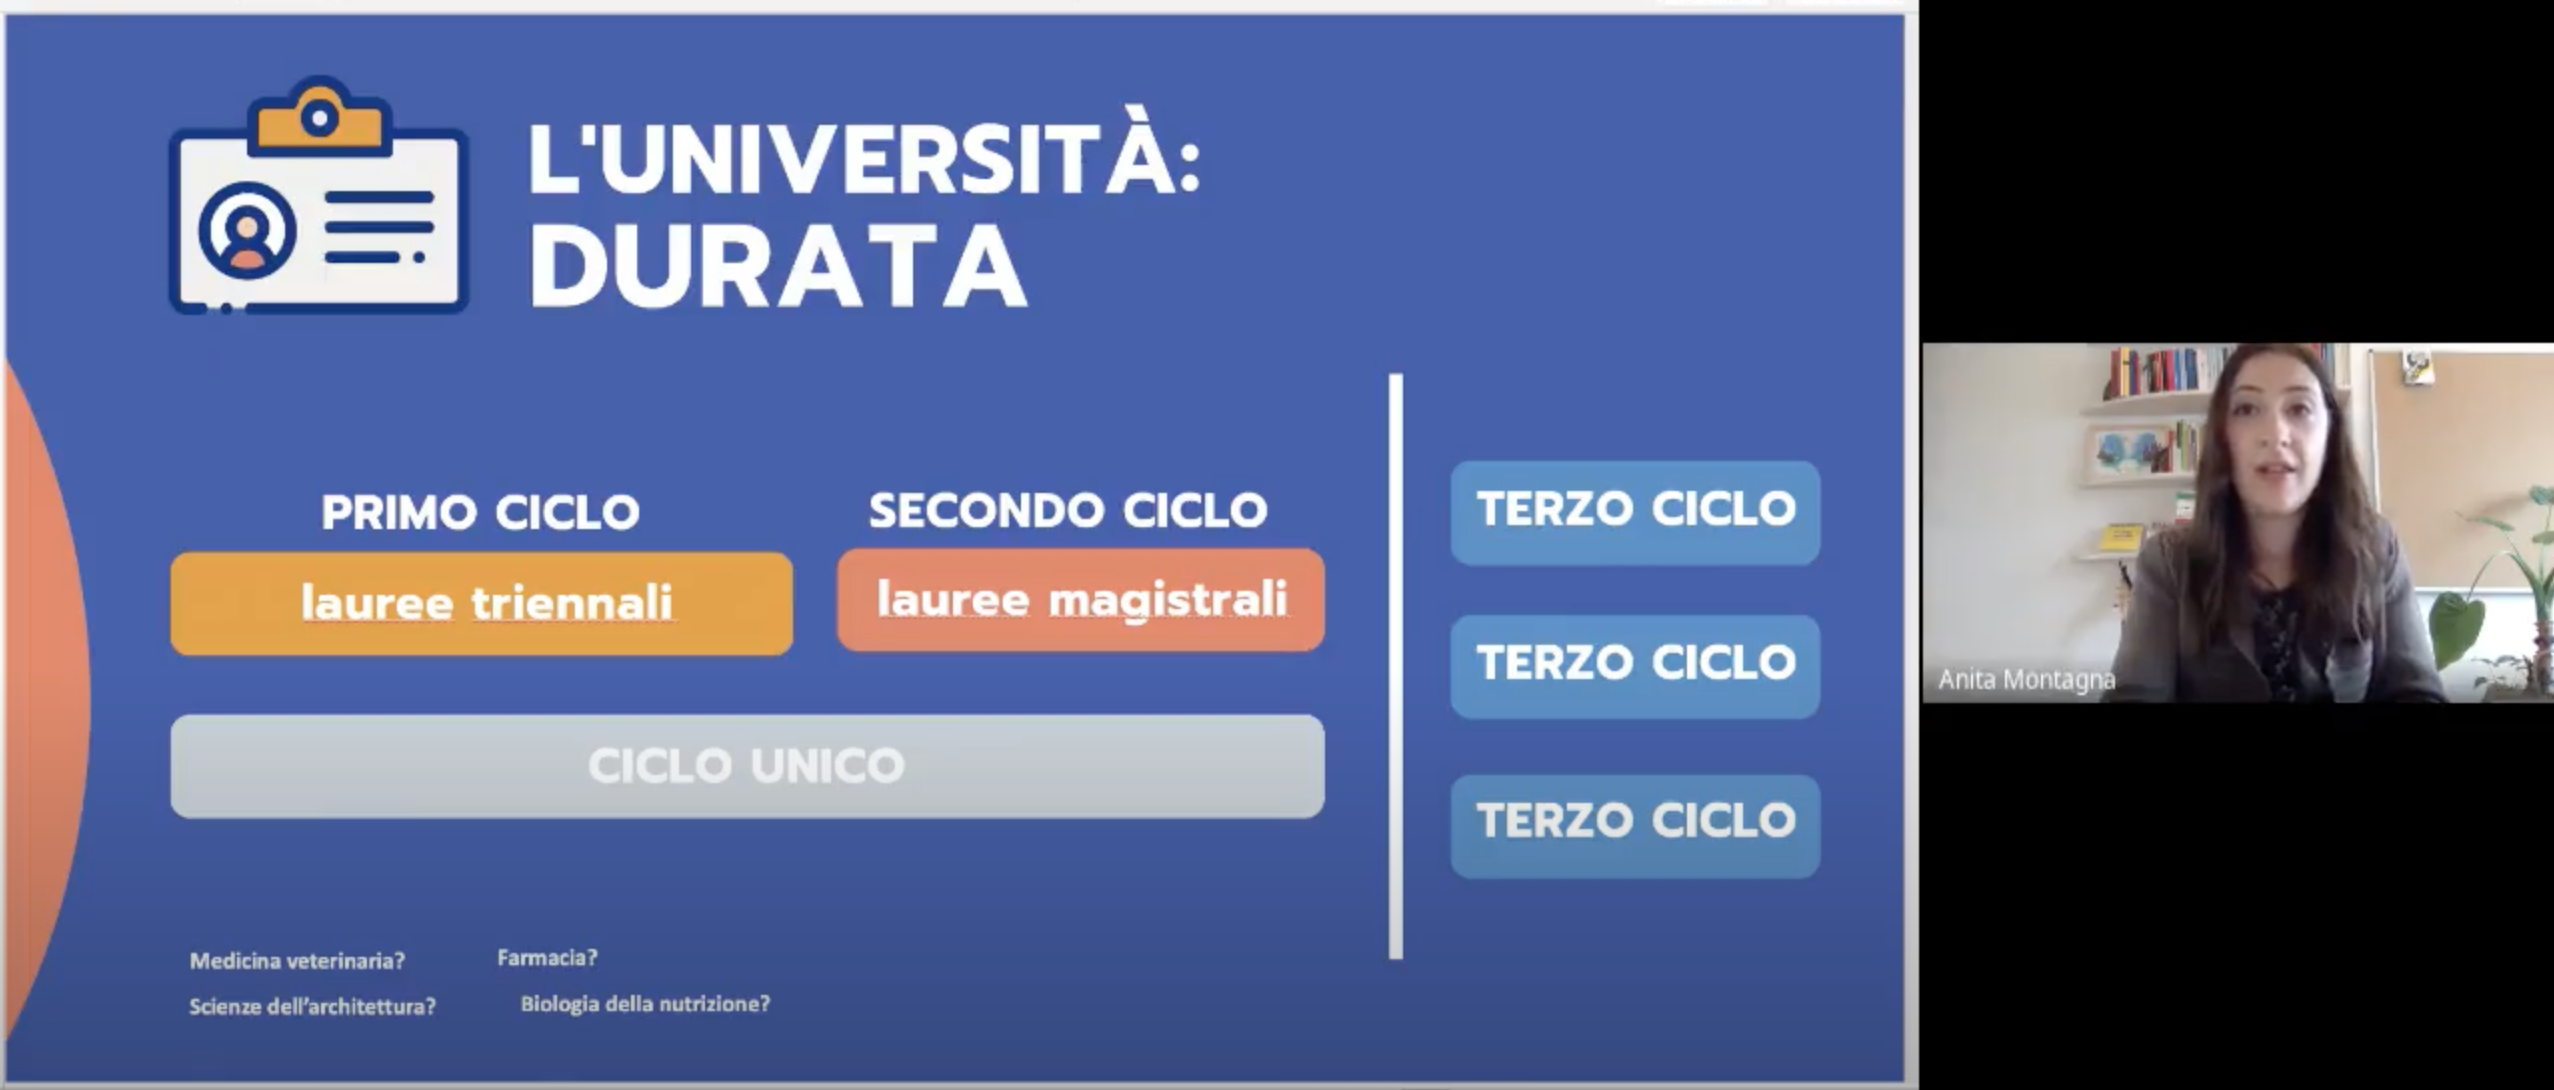 In this pilot,  the career guidance staff from University of Camerino, together with practitioners from Pluriversum and technical assistance from Citynet worked together to map the structure of career guidance web services present on the websites of Italian universities. The comparative work led to prototyping a new website for career guidance activities offered by universities to secondary school students. New formats of career information digital activities were also tested with 4 classes from the Macerata province.